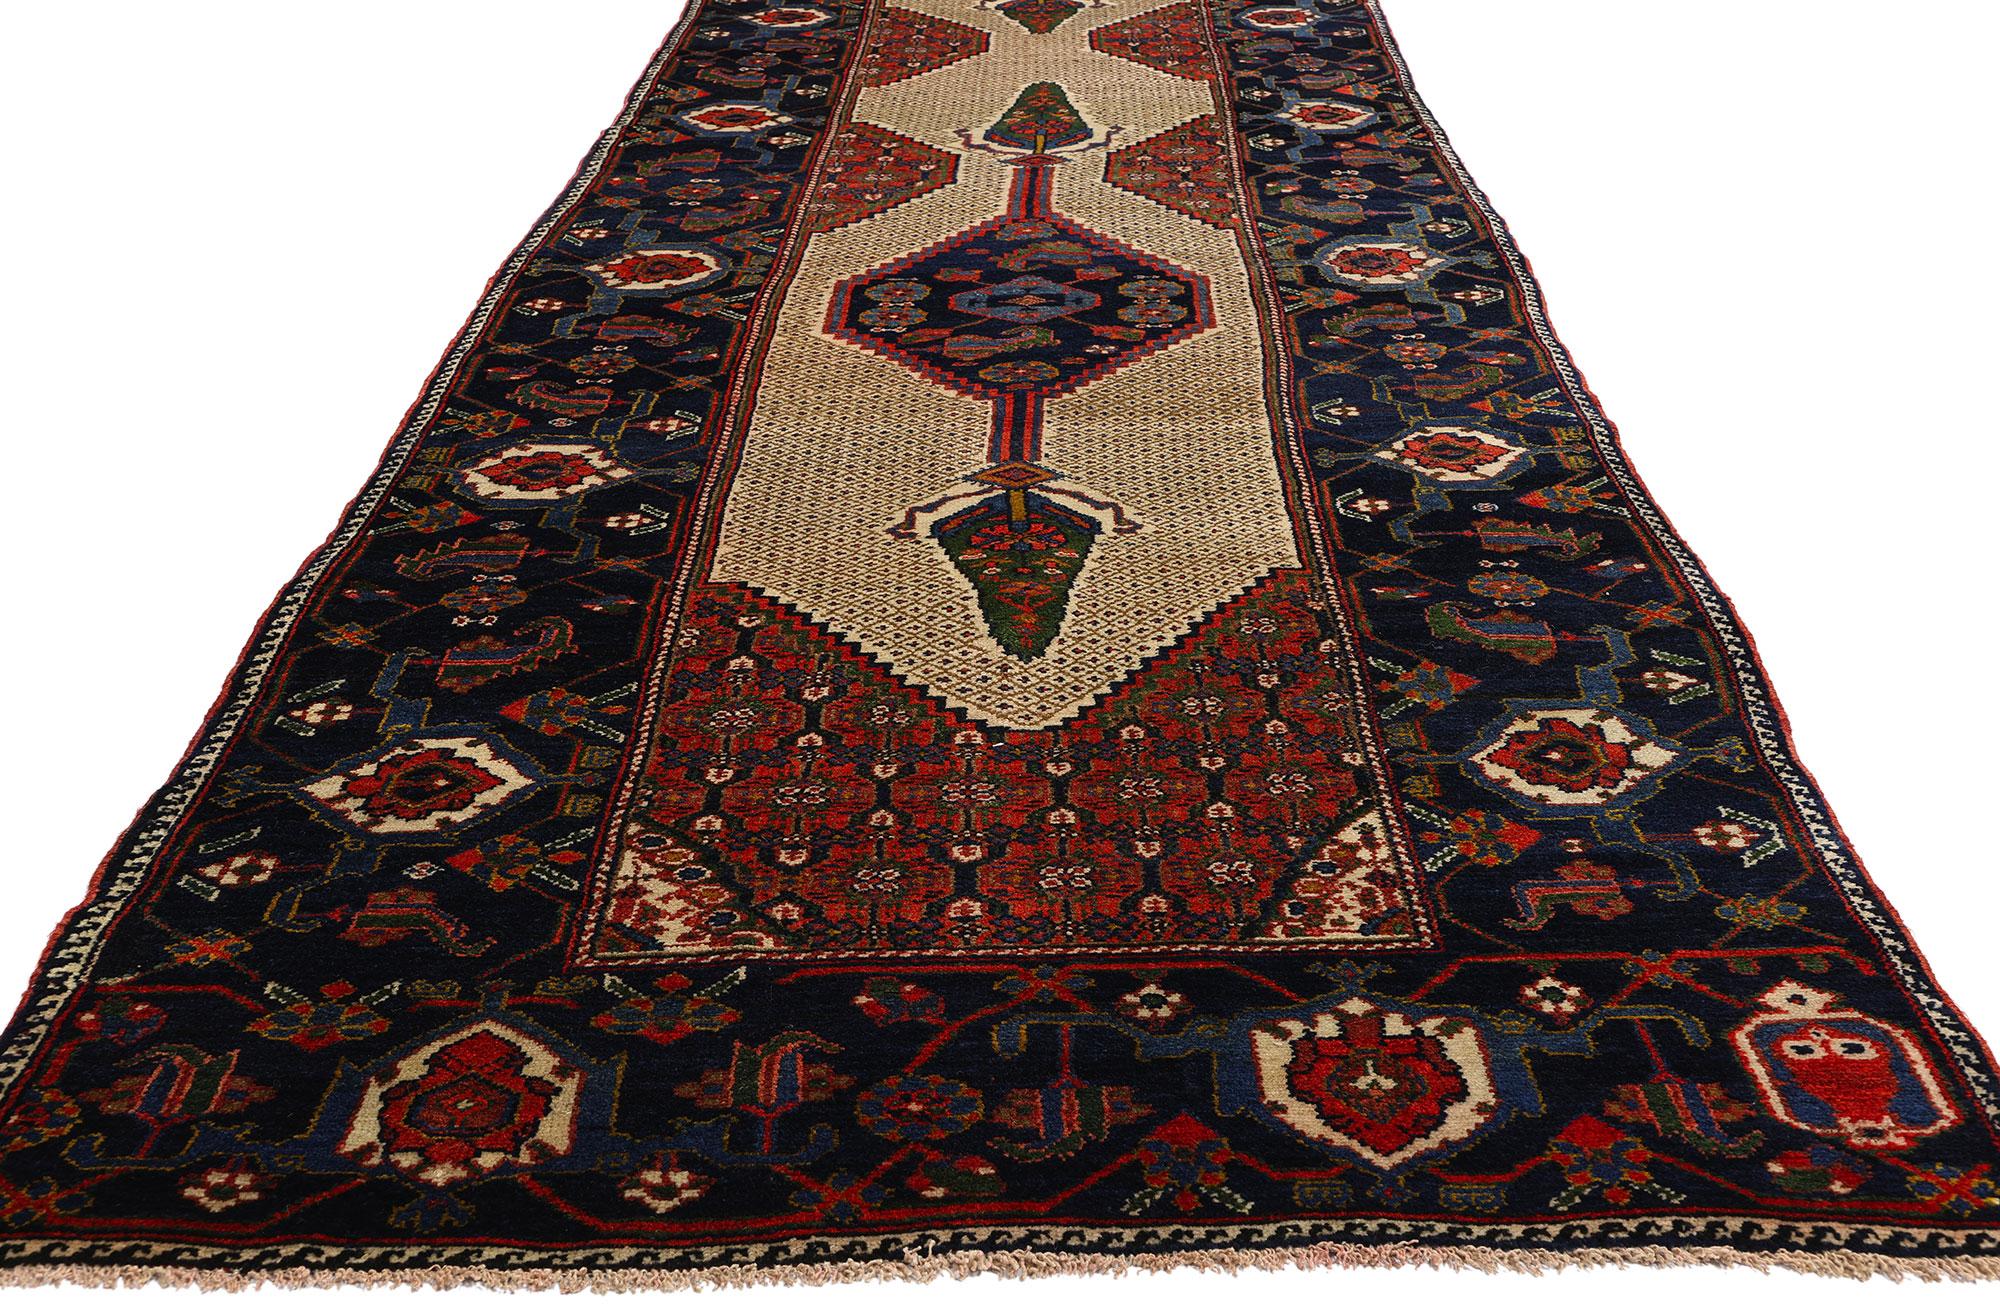 53877 Extra-Long Vintage Persian Malayer Rug Runner, 03'02 x 21'00. Antique Persian Malayer rug runners are long, narrow hand-knotted wool rugs originating from Malayer, Iran, prized for their age, intricate designs, and exceptional craftsmanship.